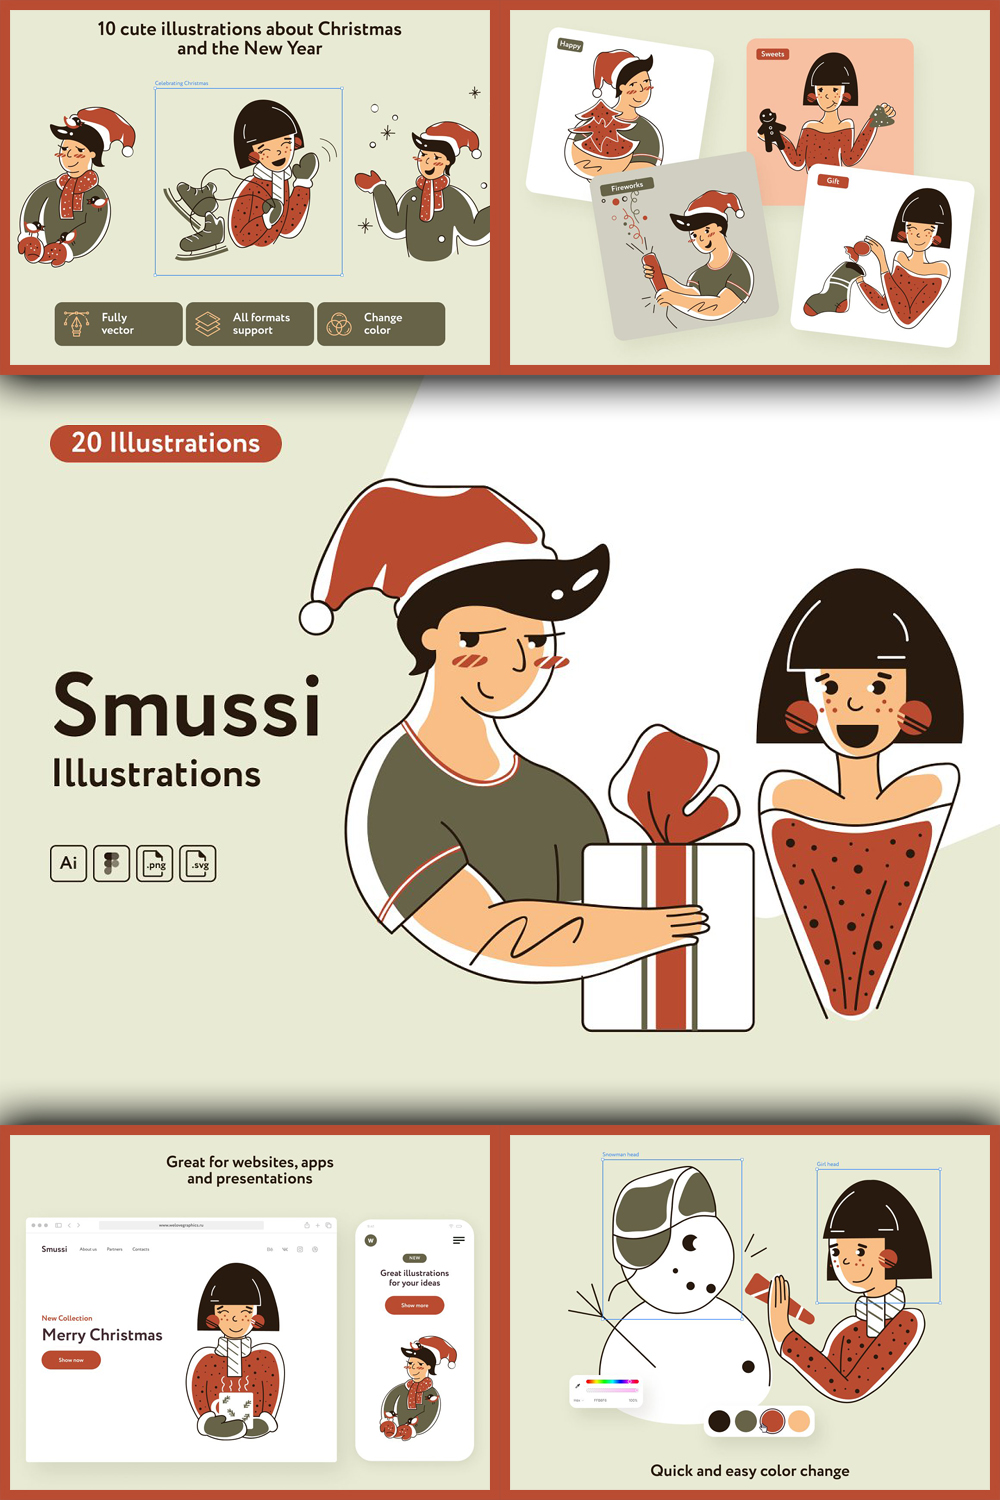 Smussi christmas illustrations of pinterest.